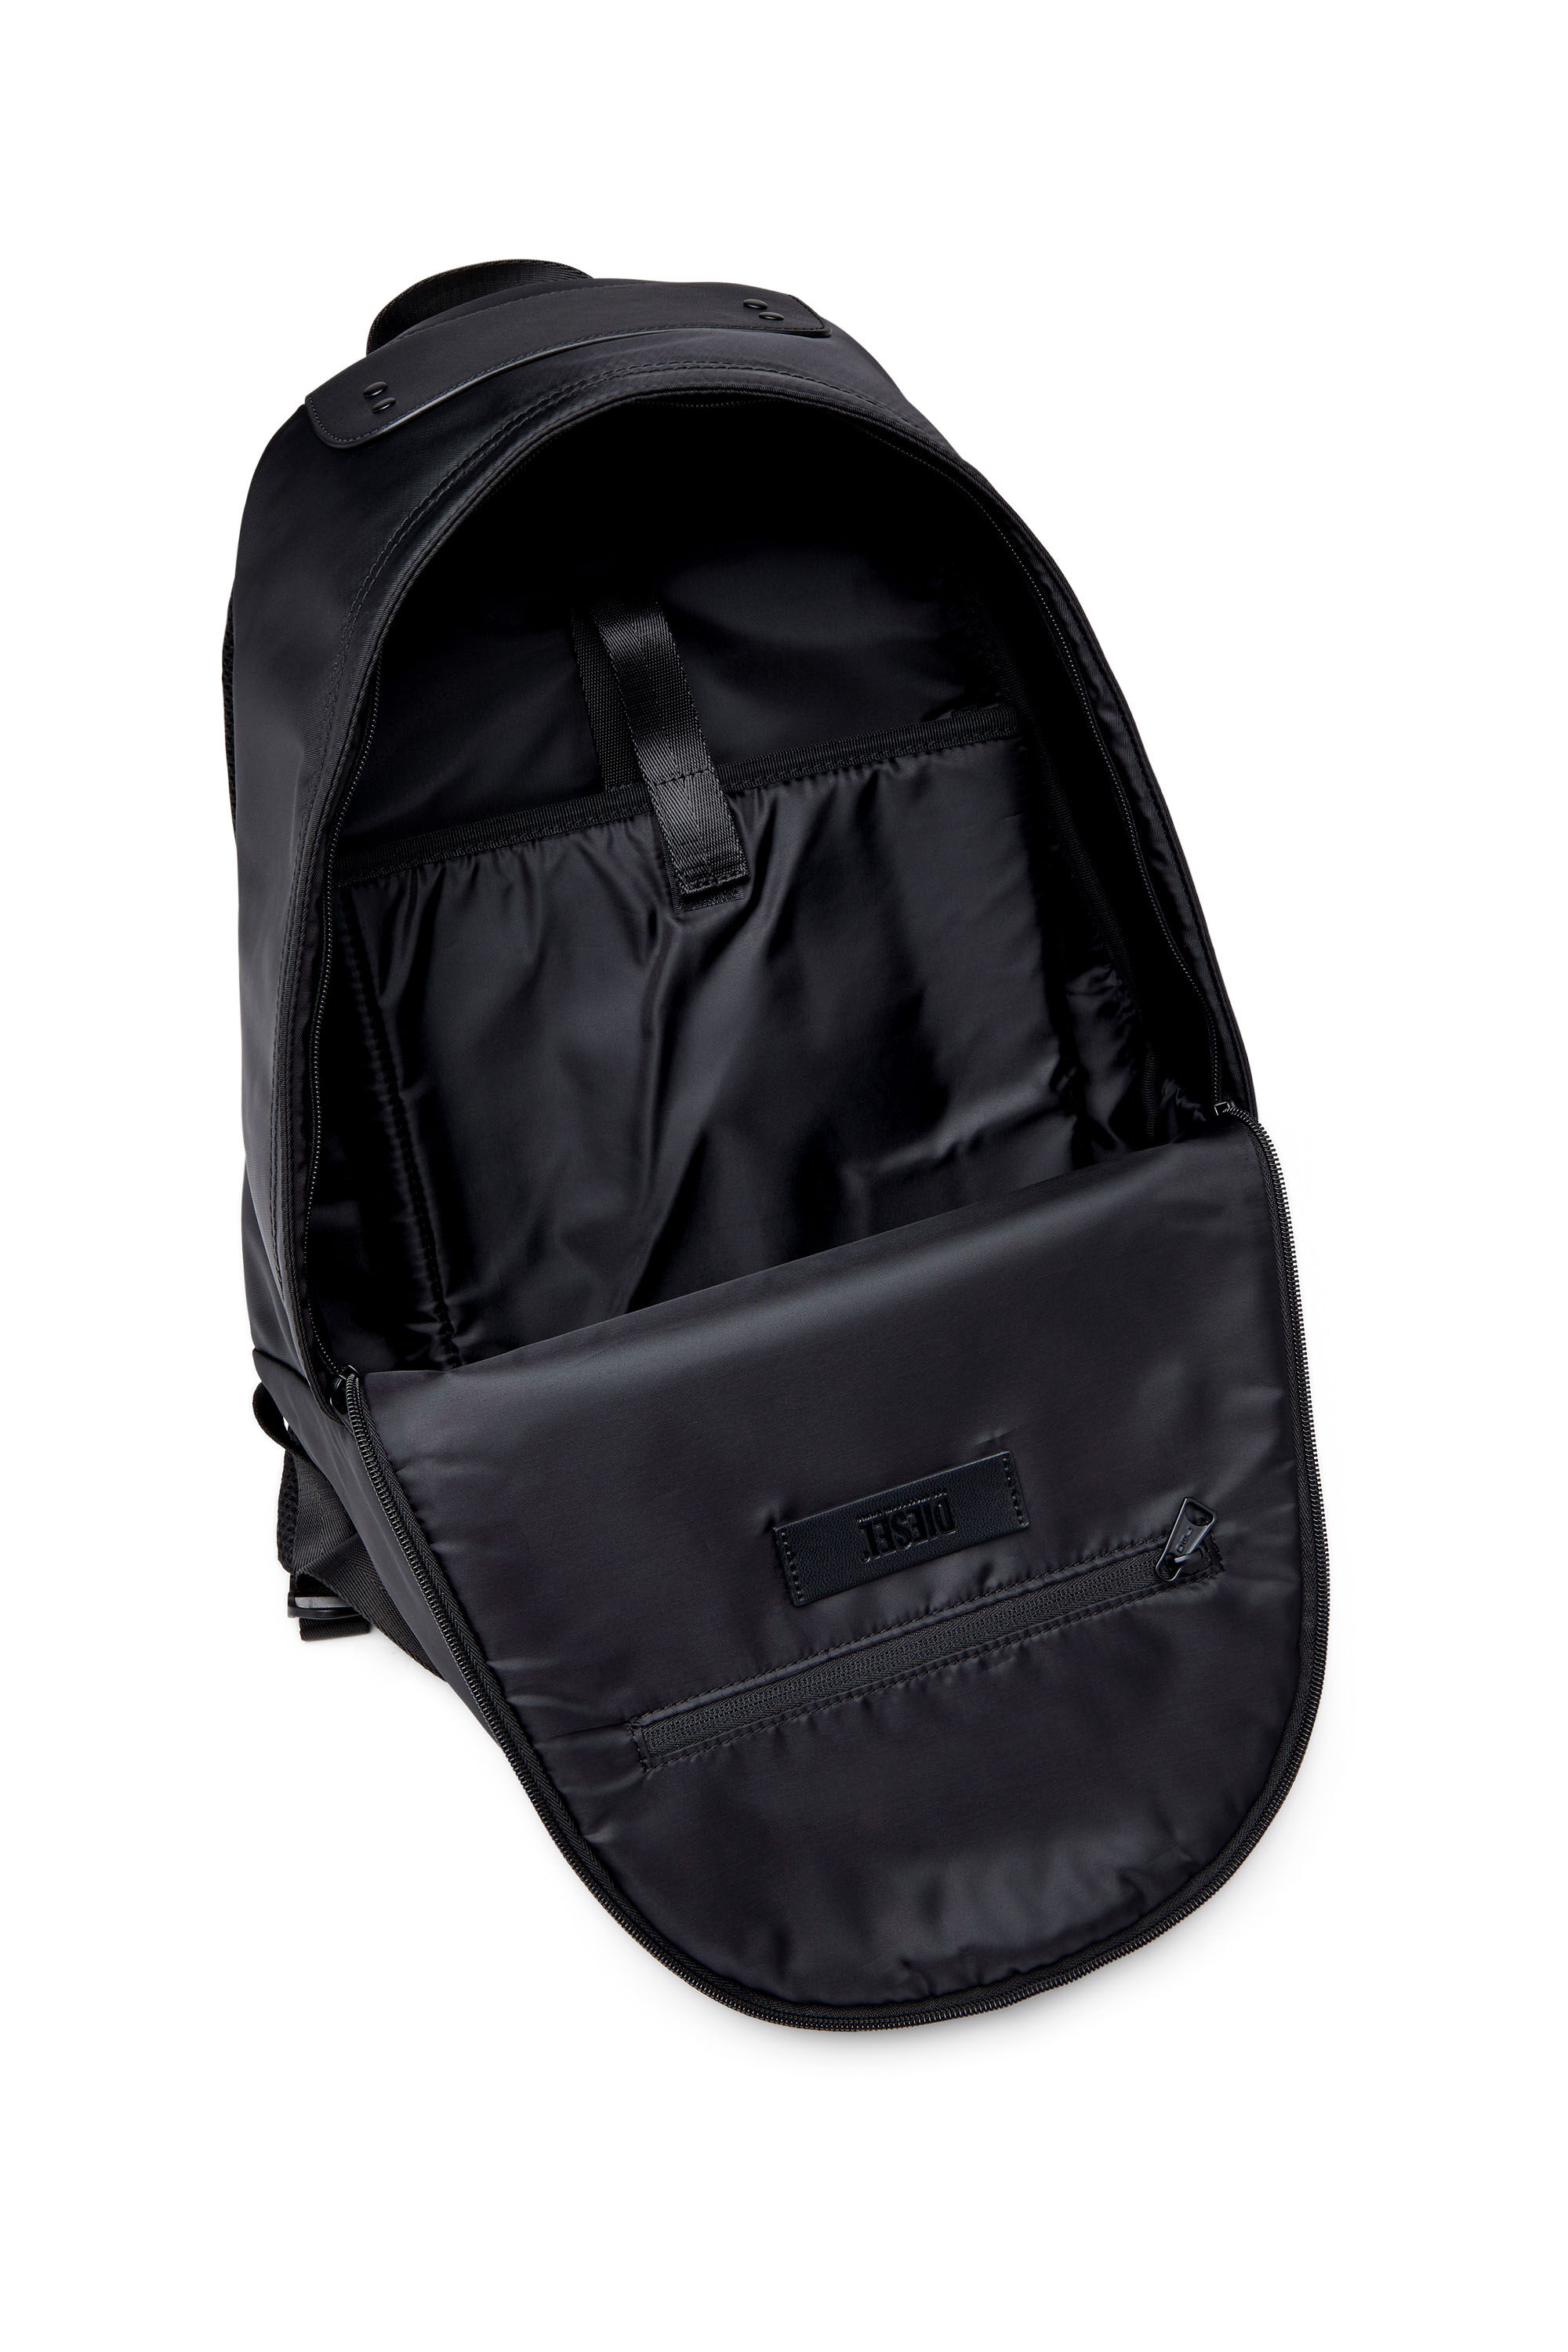 RINKE BACKPACK Man: Backpack in technical fabric with logo | Diesel